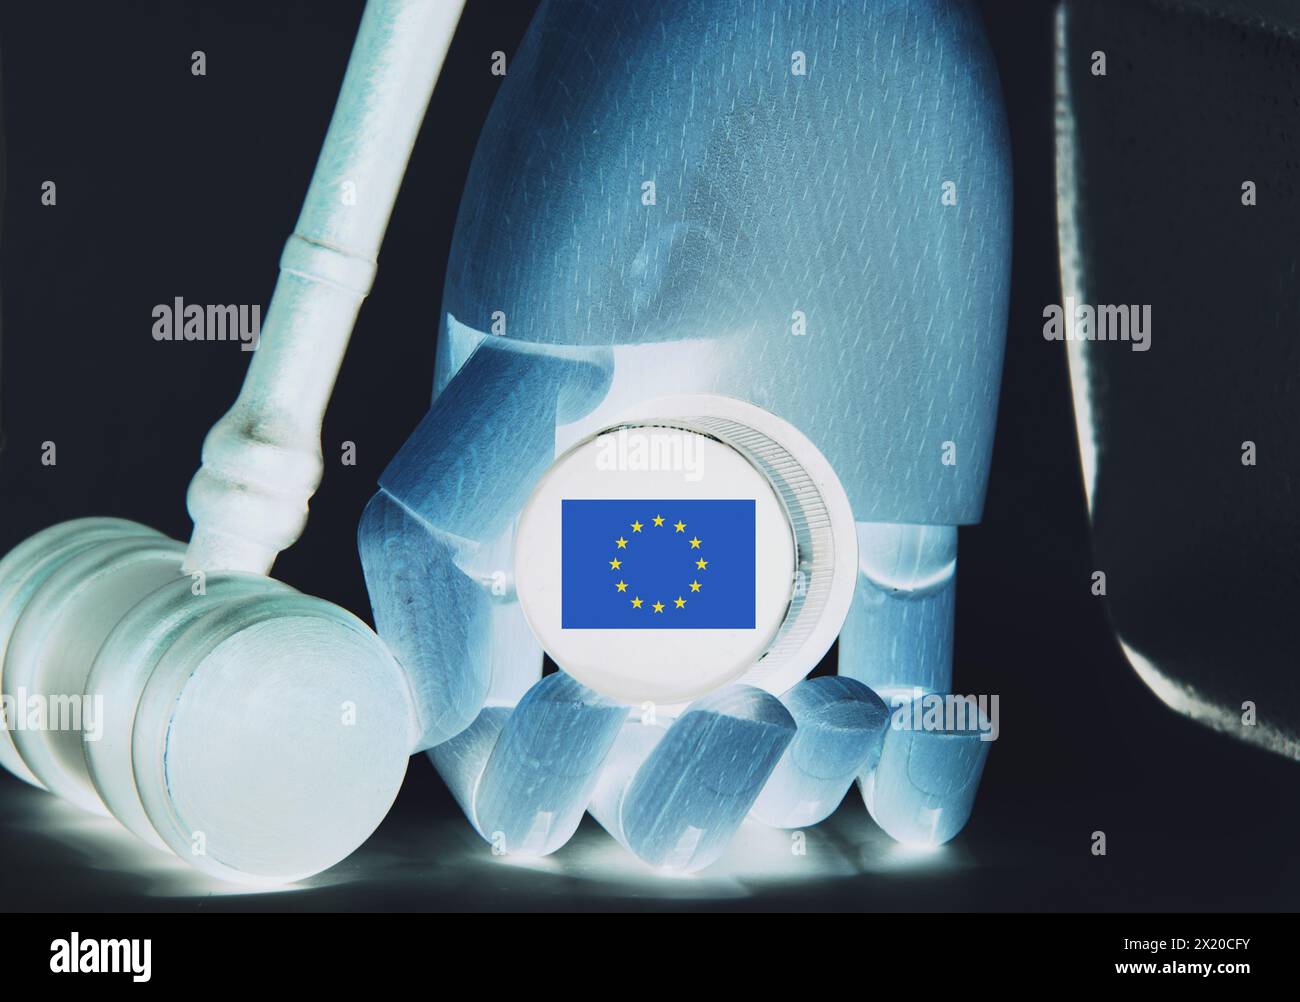 Flag of European Union with Gavel and robot hand . Symbolizing the potential regulation of AI from Eu parliament. Stock Photo